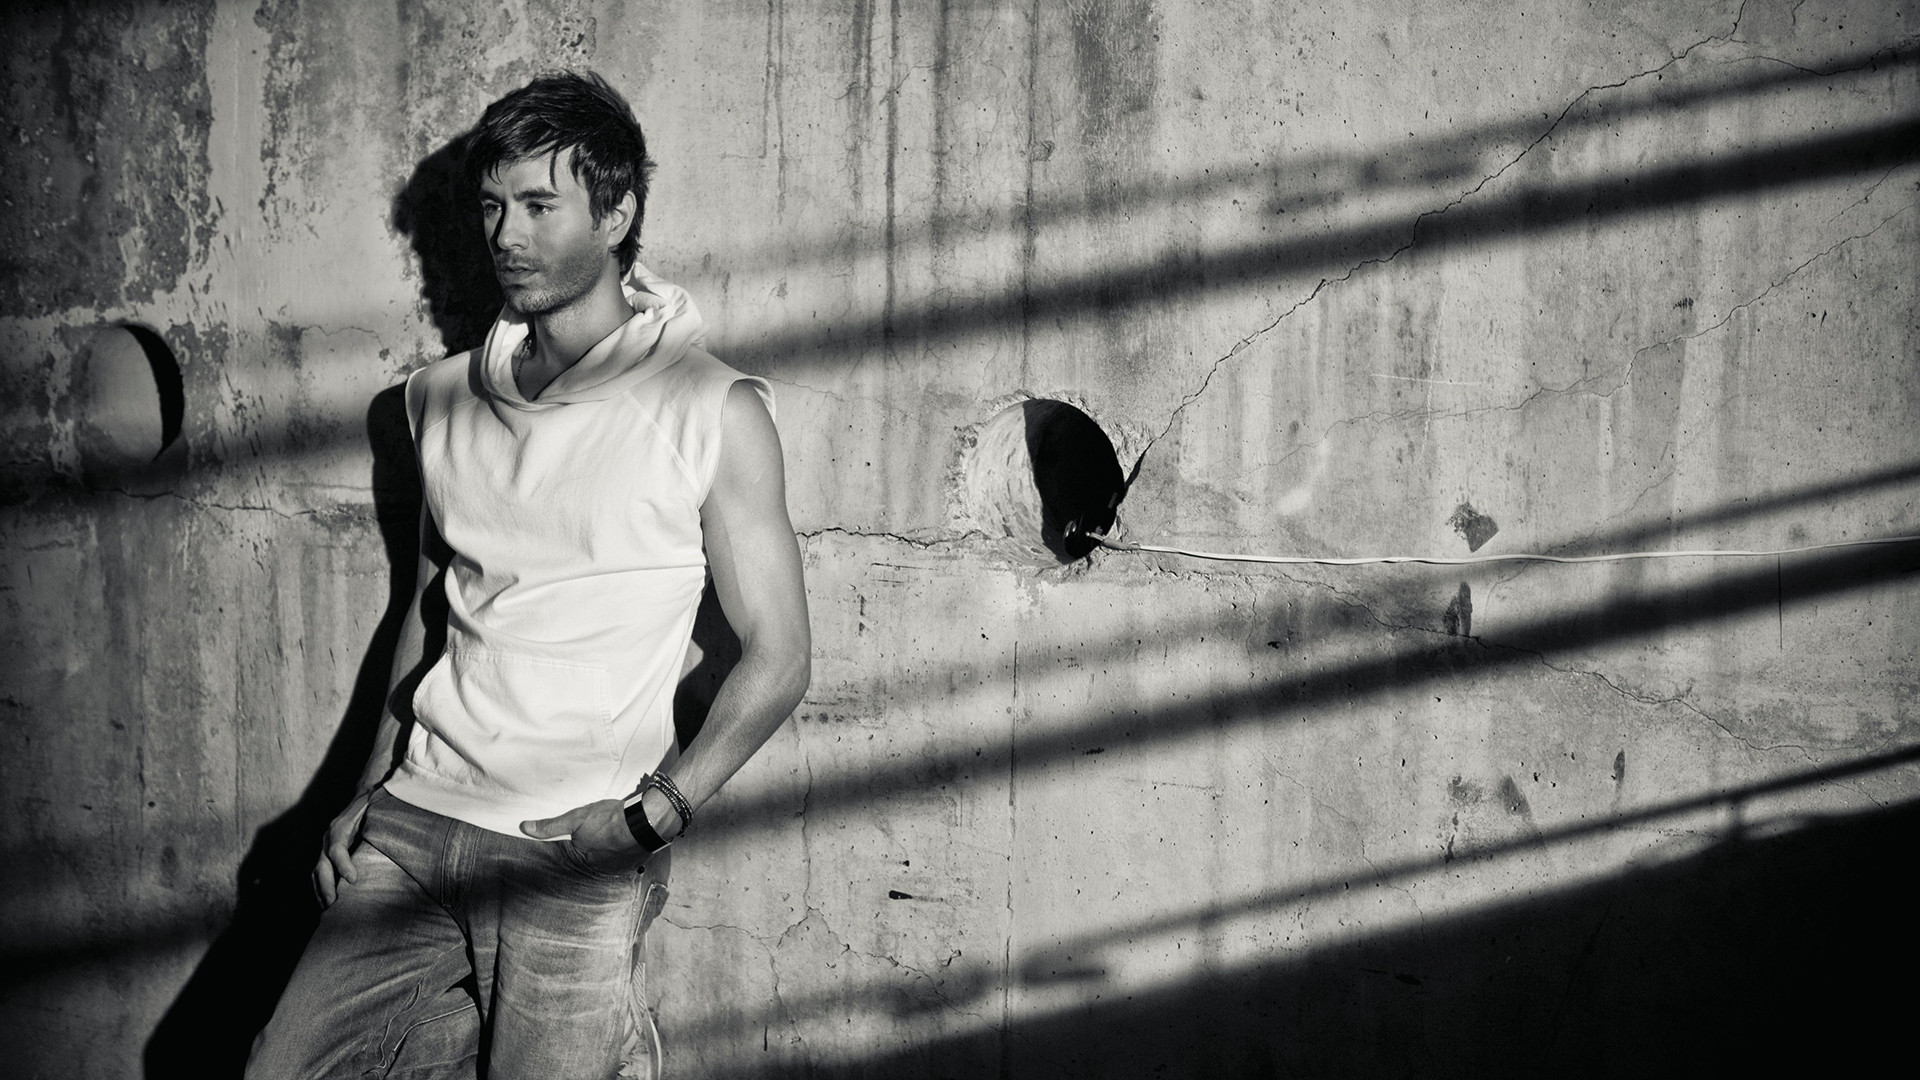 Enrique Iglesias Hq Wallpaper Just Another